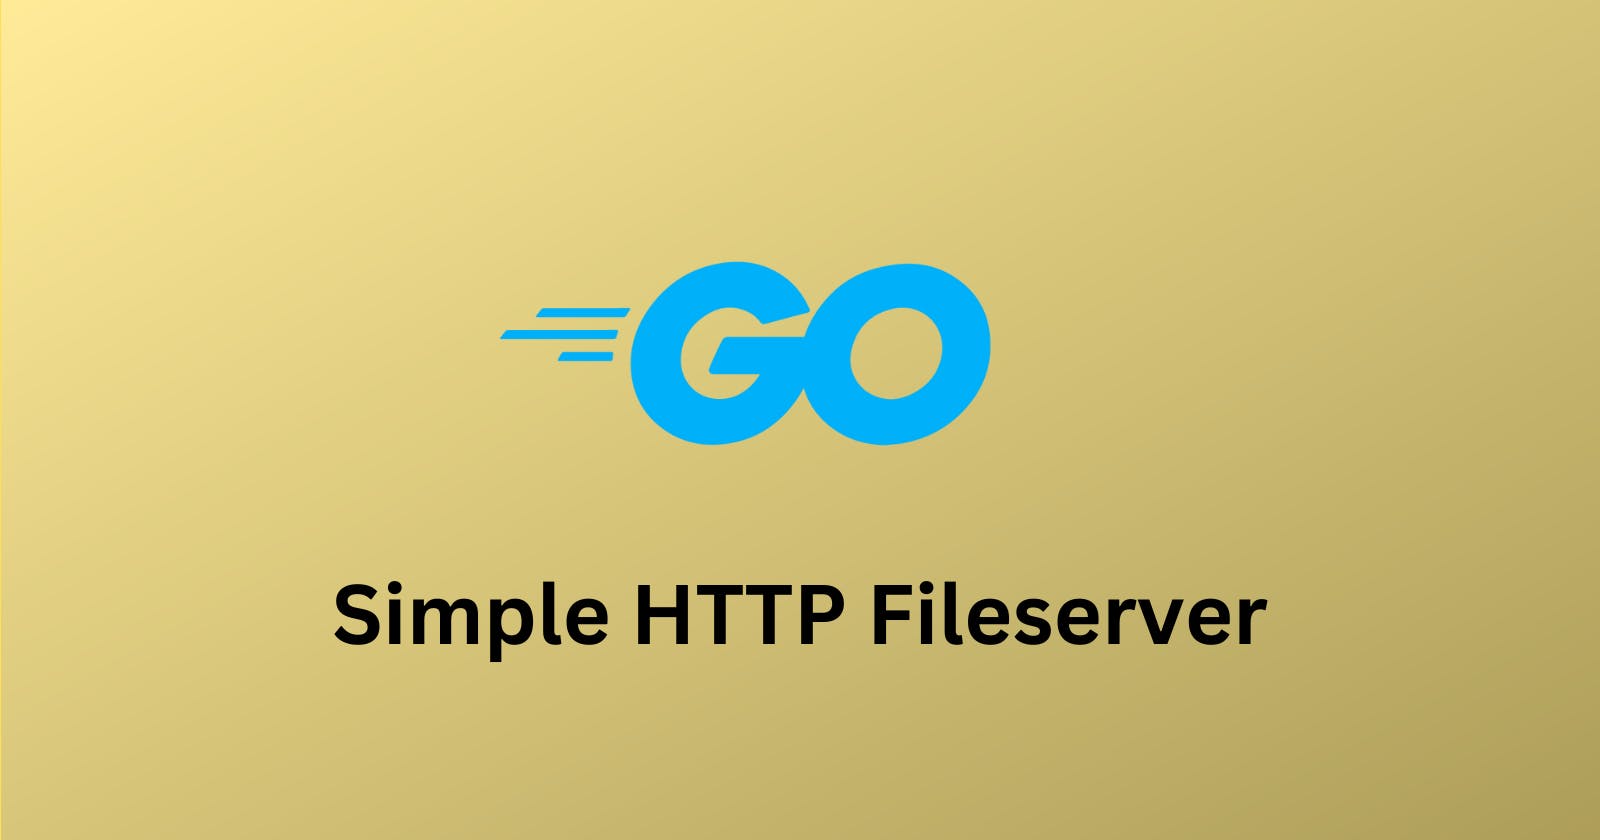 Create a simple fileserver in Golang